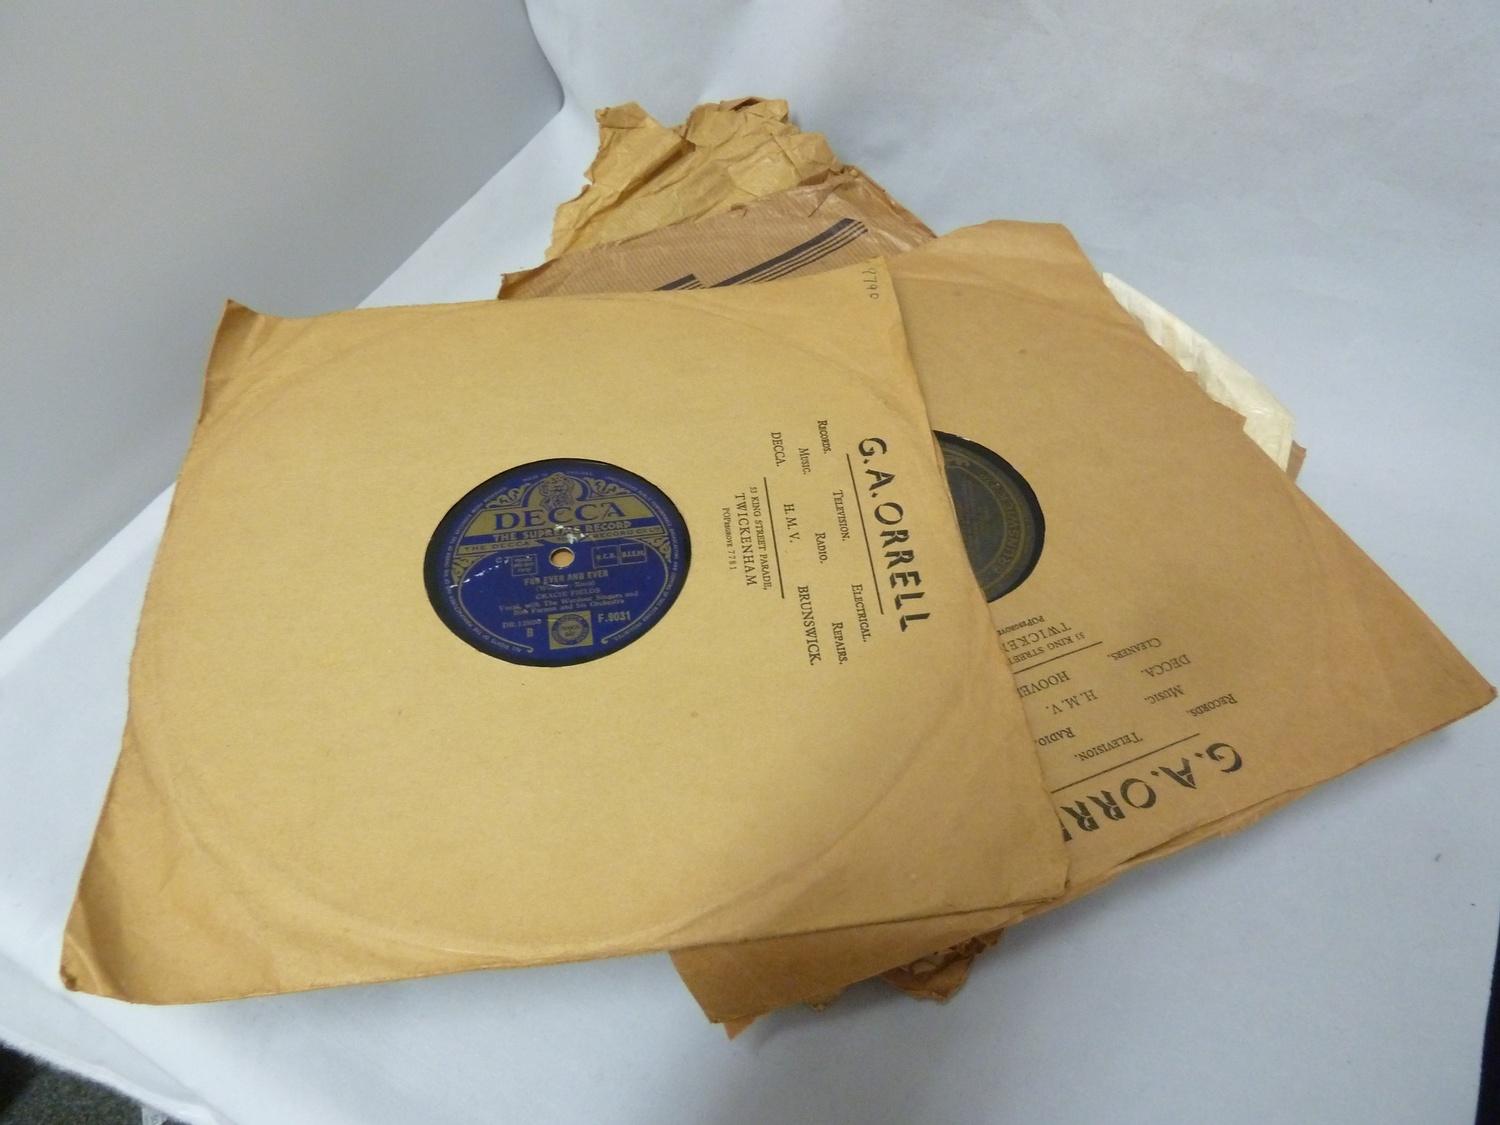 Records - including Bing Crosby, Al Jolson, Doris Day, and others - full list in image 2 (27)